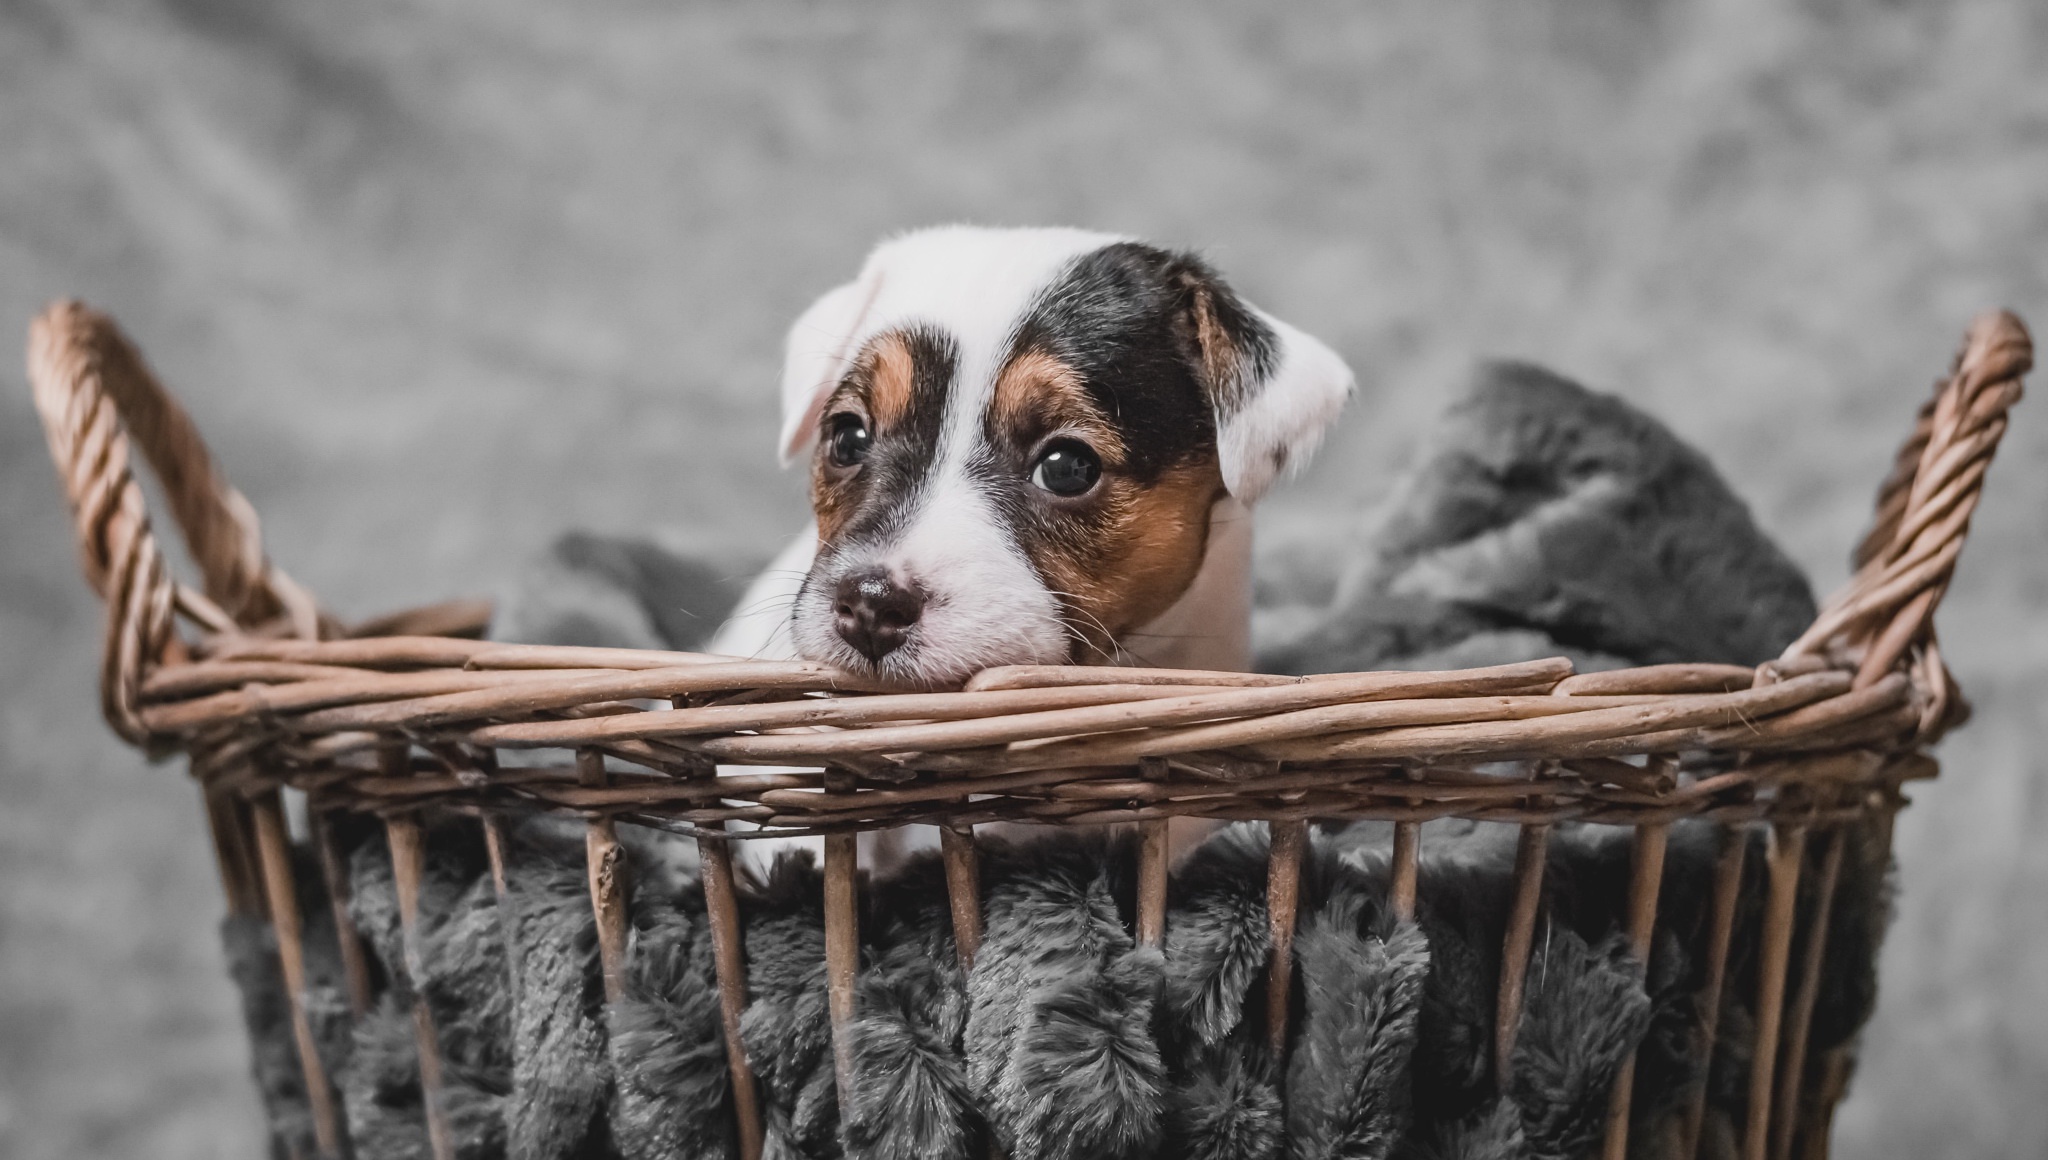 basket, animal, jack russell terrier, baby animal, dog, muzzle, puppy, dogs